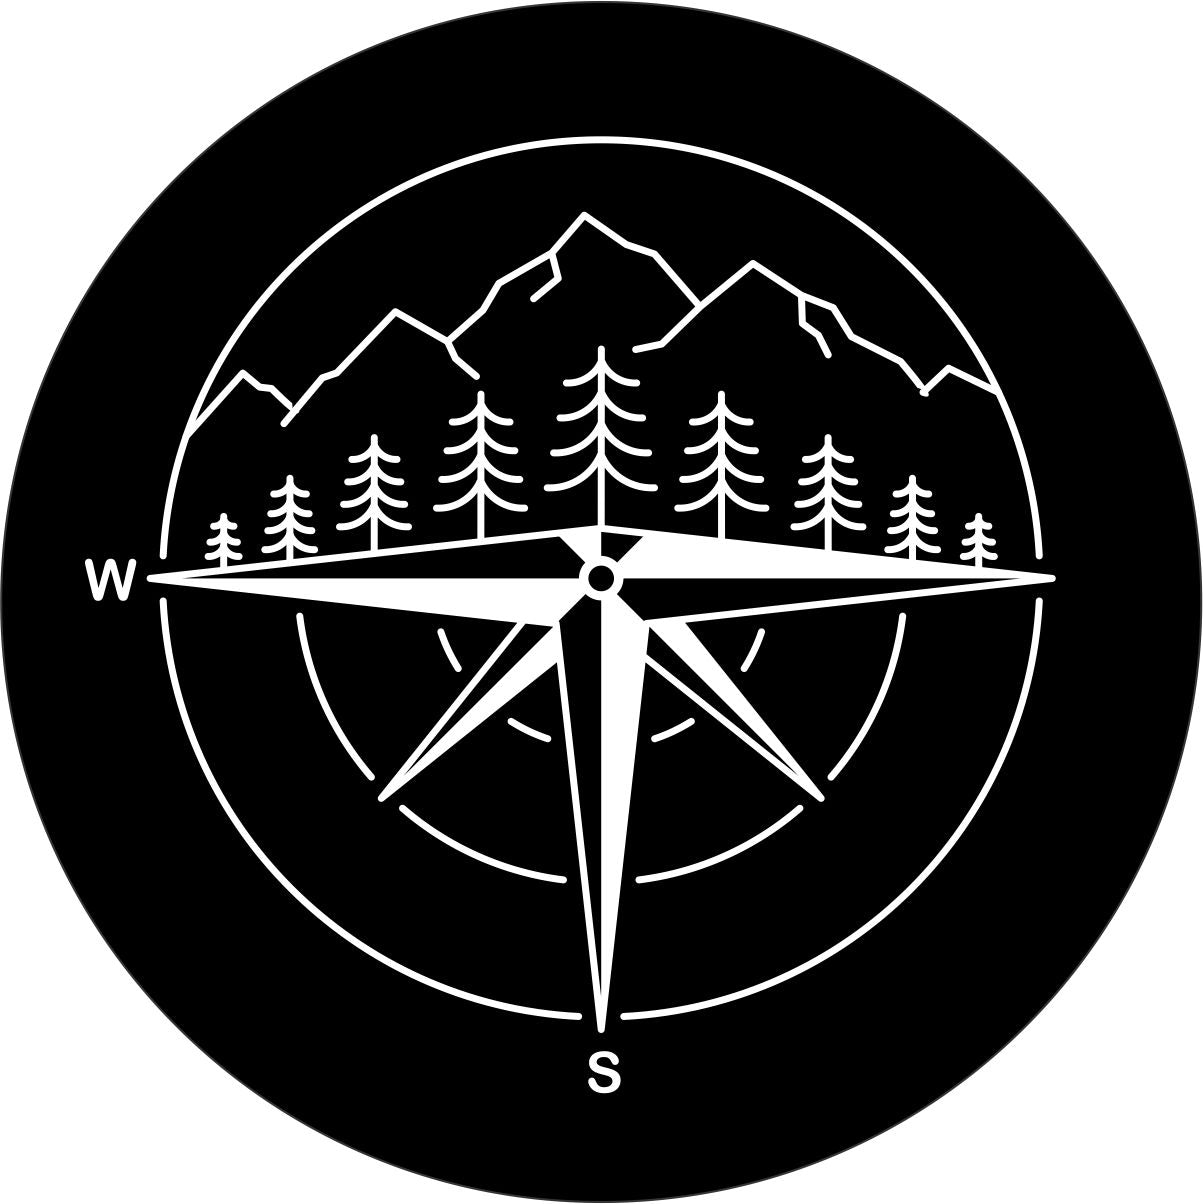 Bottom half of a compass showing south and west with a silhouette of mountains on the north side as a spare tire cover design for any vehicle